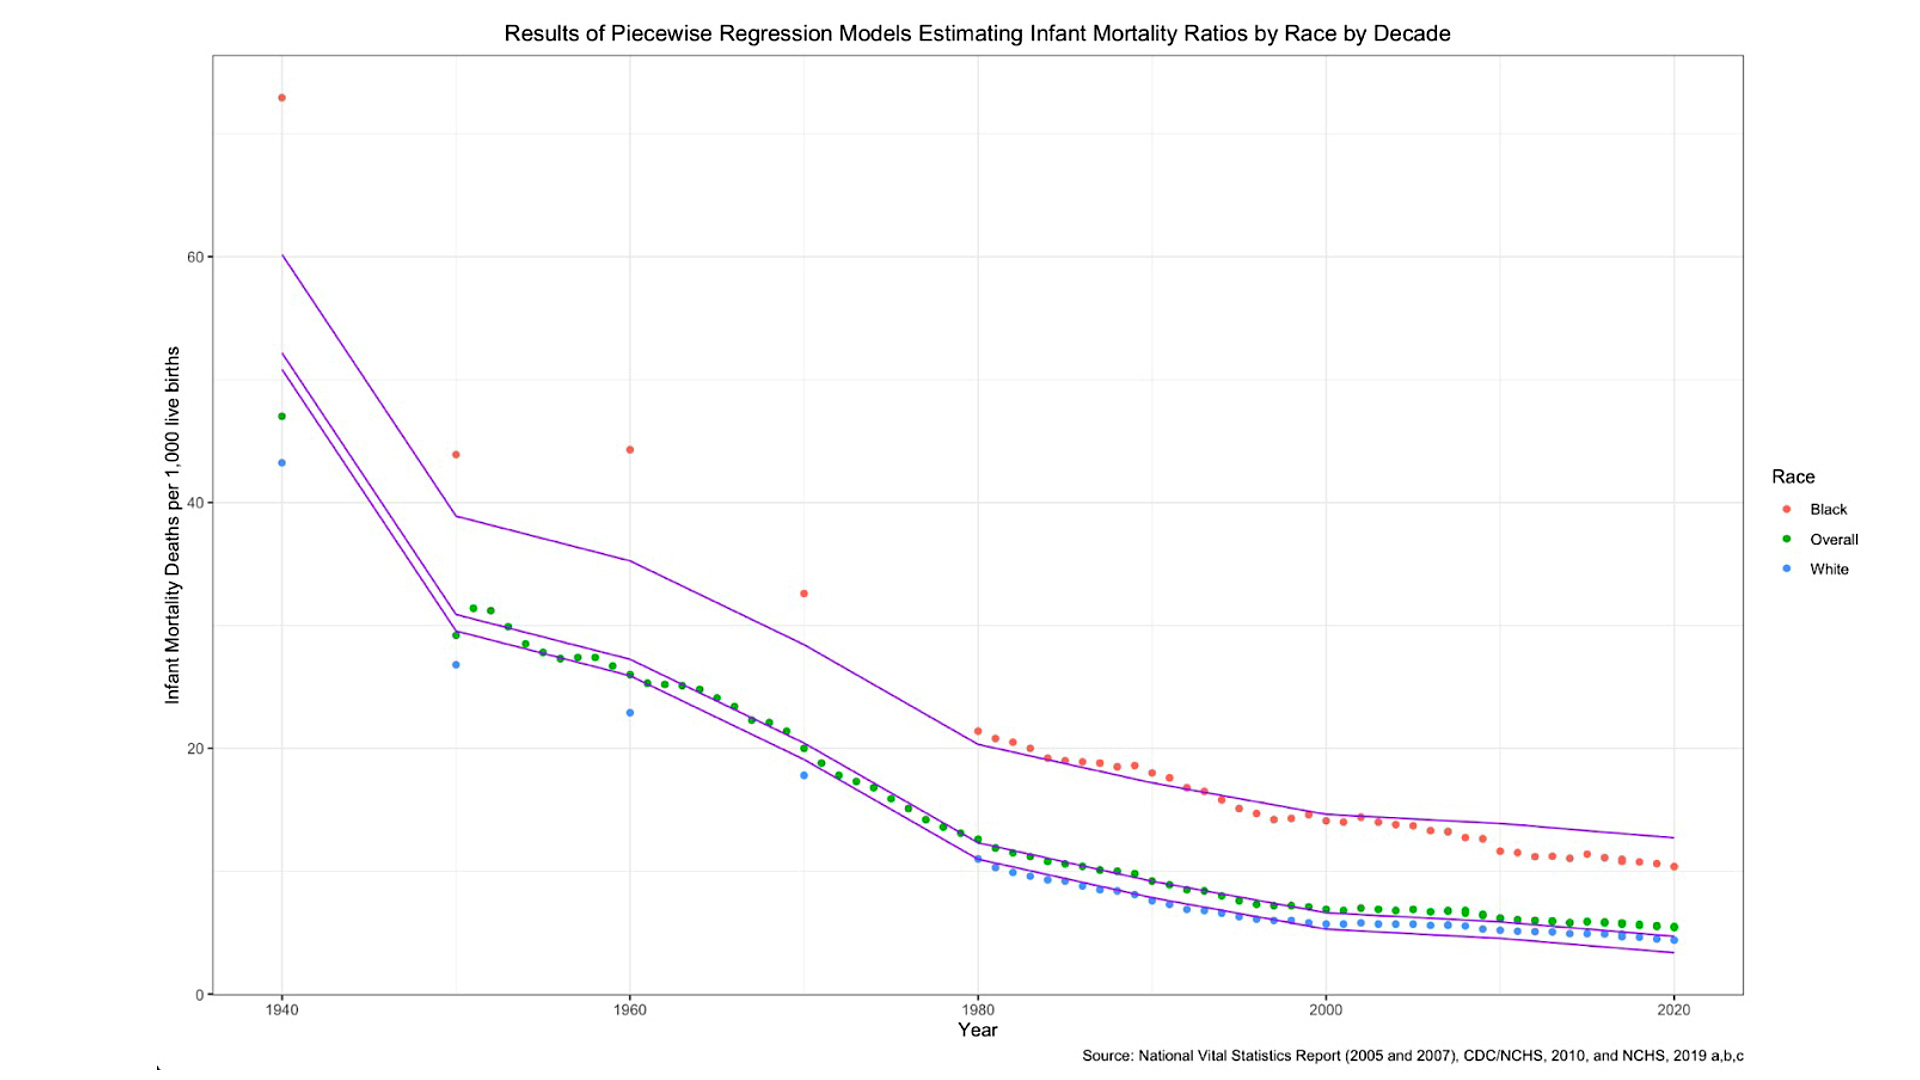 Figure 1 Results of Piecewise Regression Models Estimating Infant Mortality Ratios by Race by Decade